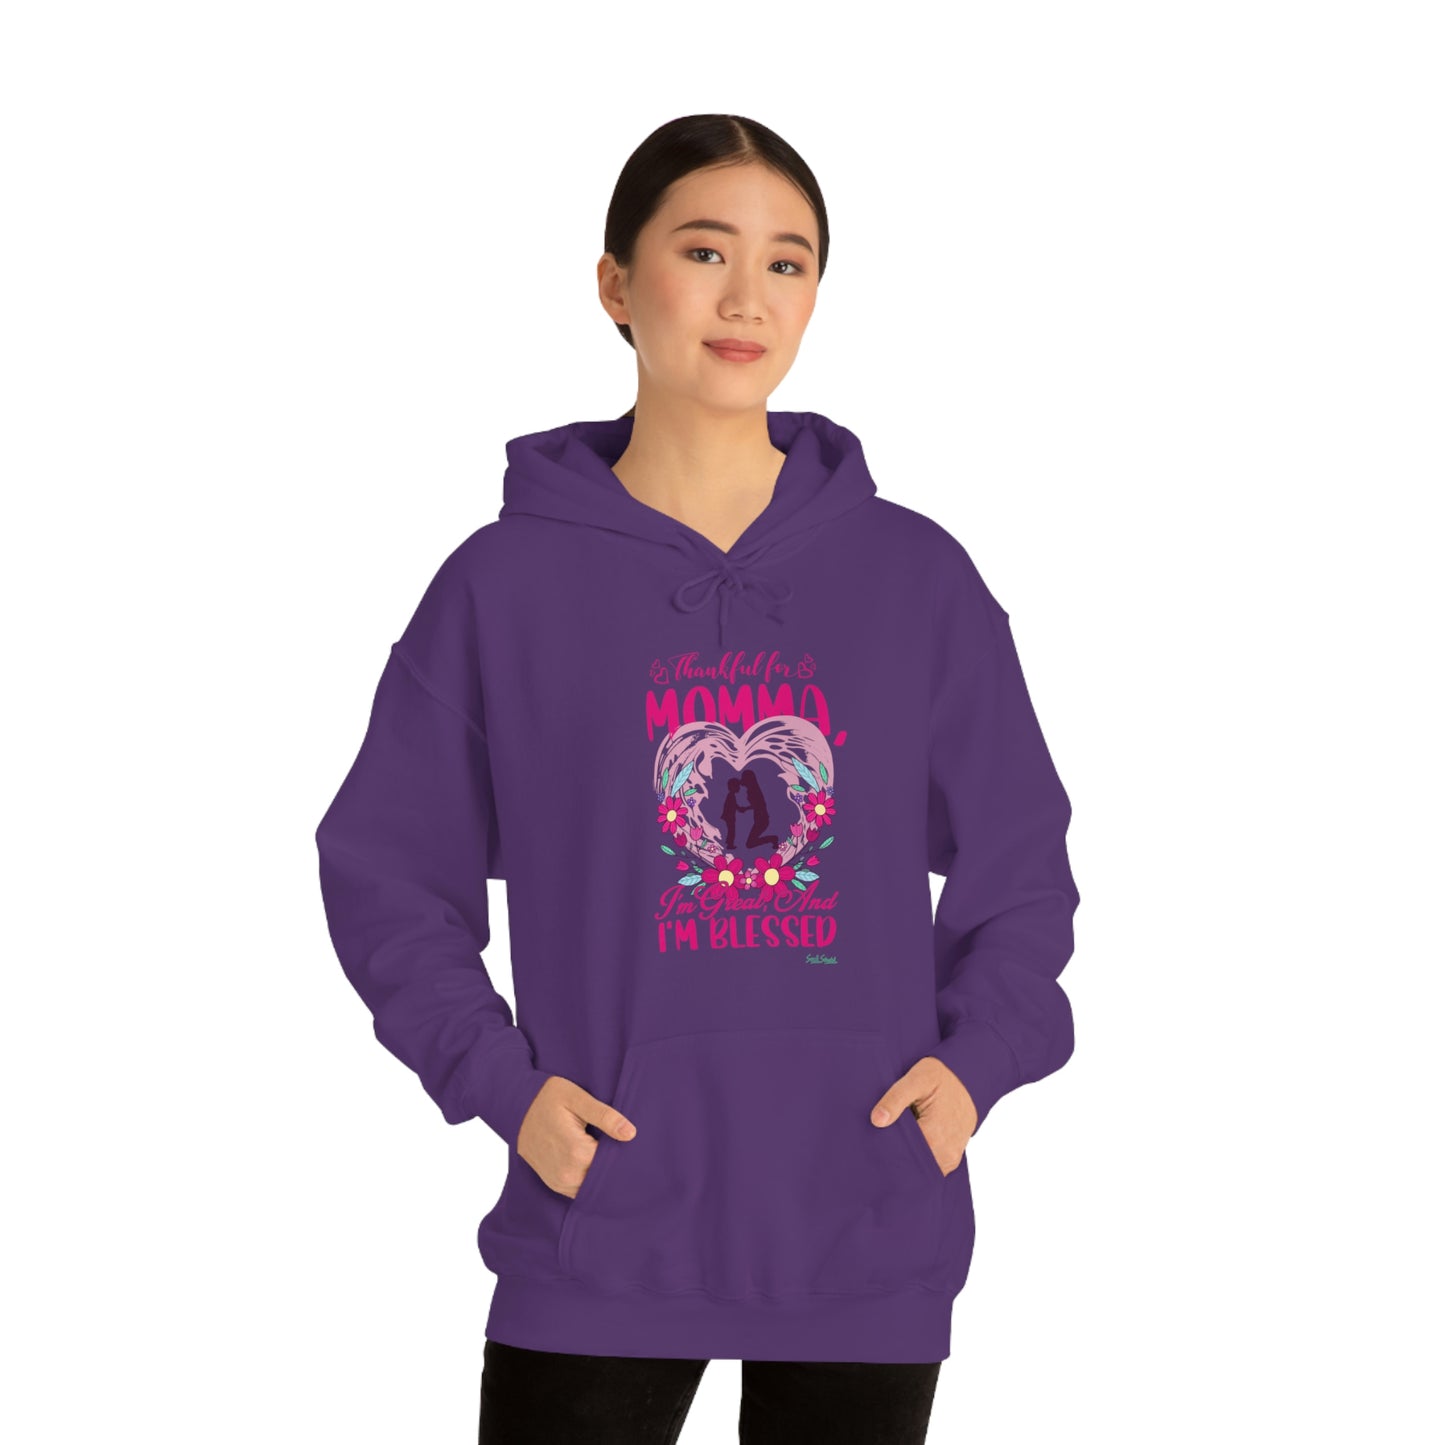 *Limited Edition* Mothers Day Hoodie